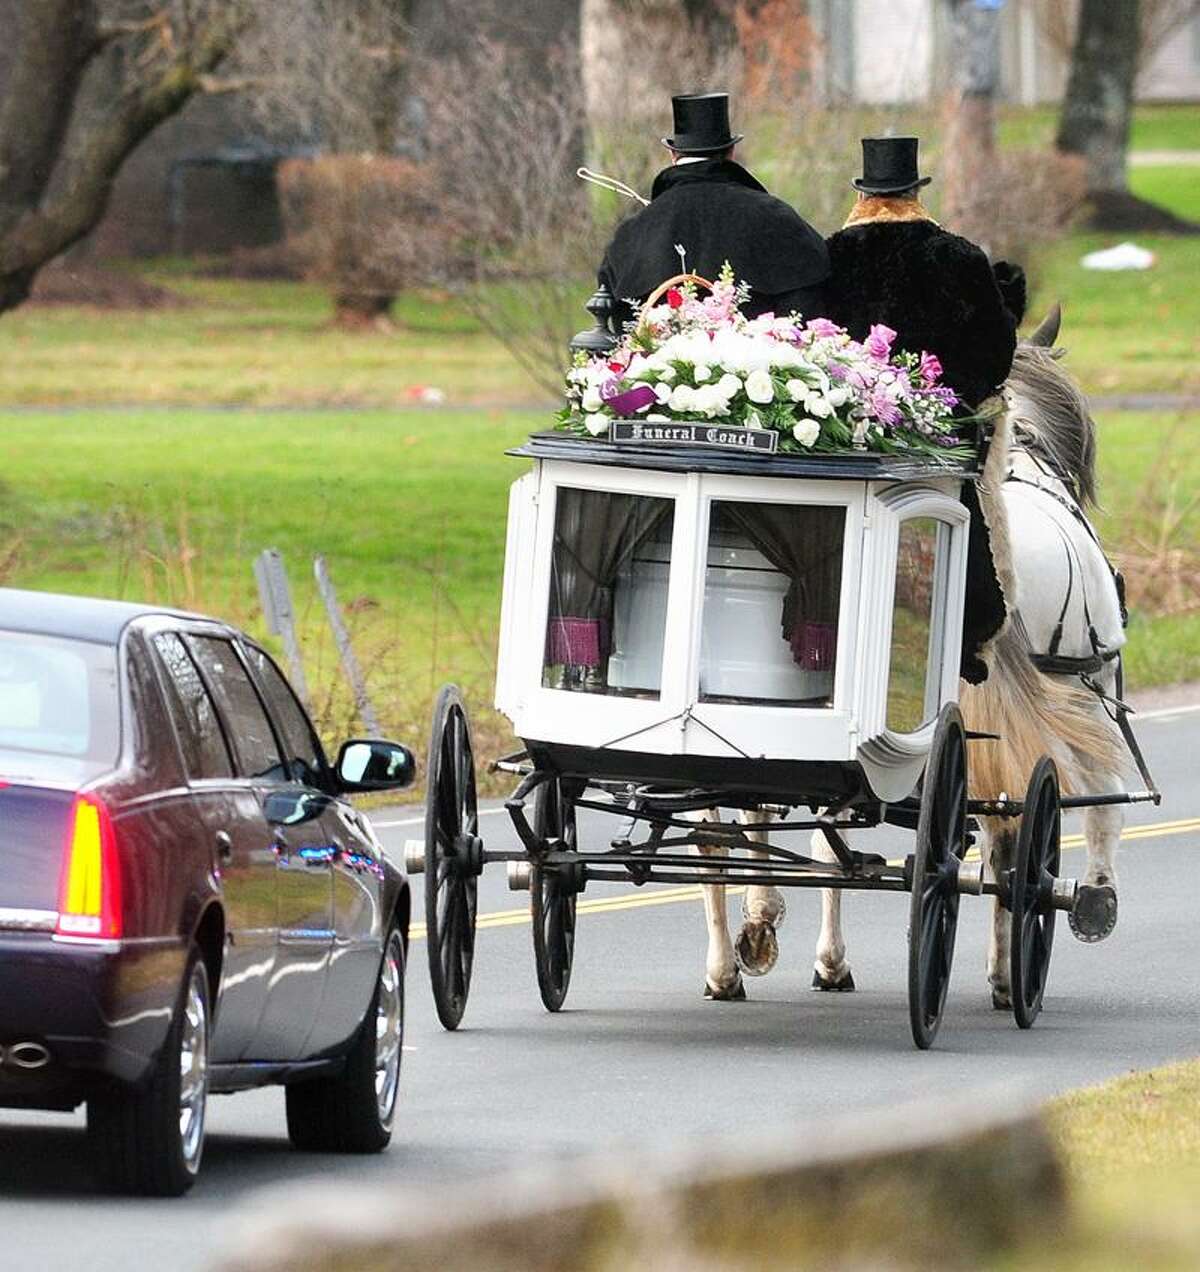 A horse drawn funeral coach carries the body of Sandy Hook Elementary School shooting victim Ana Grace Marquez-Greene from funeral services at The First Cathedral in Bloomfield on 12/22/2012. On the carriage are Randy Franklin (left) and John Allegra (right) of Allegra Farm.Photo by Arnold Gold/New Haven Register